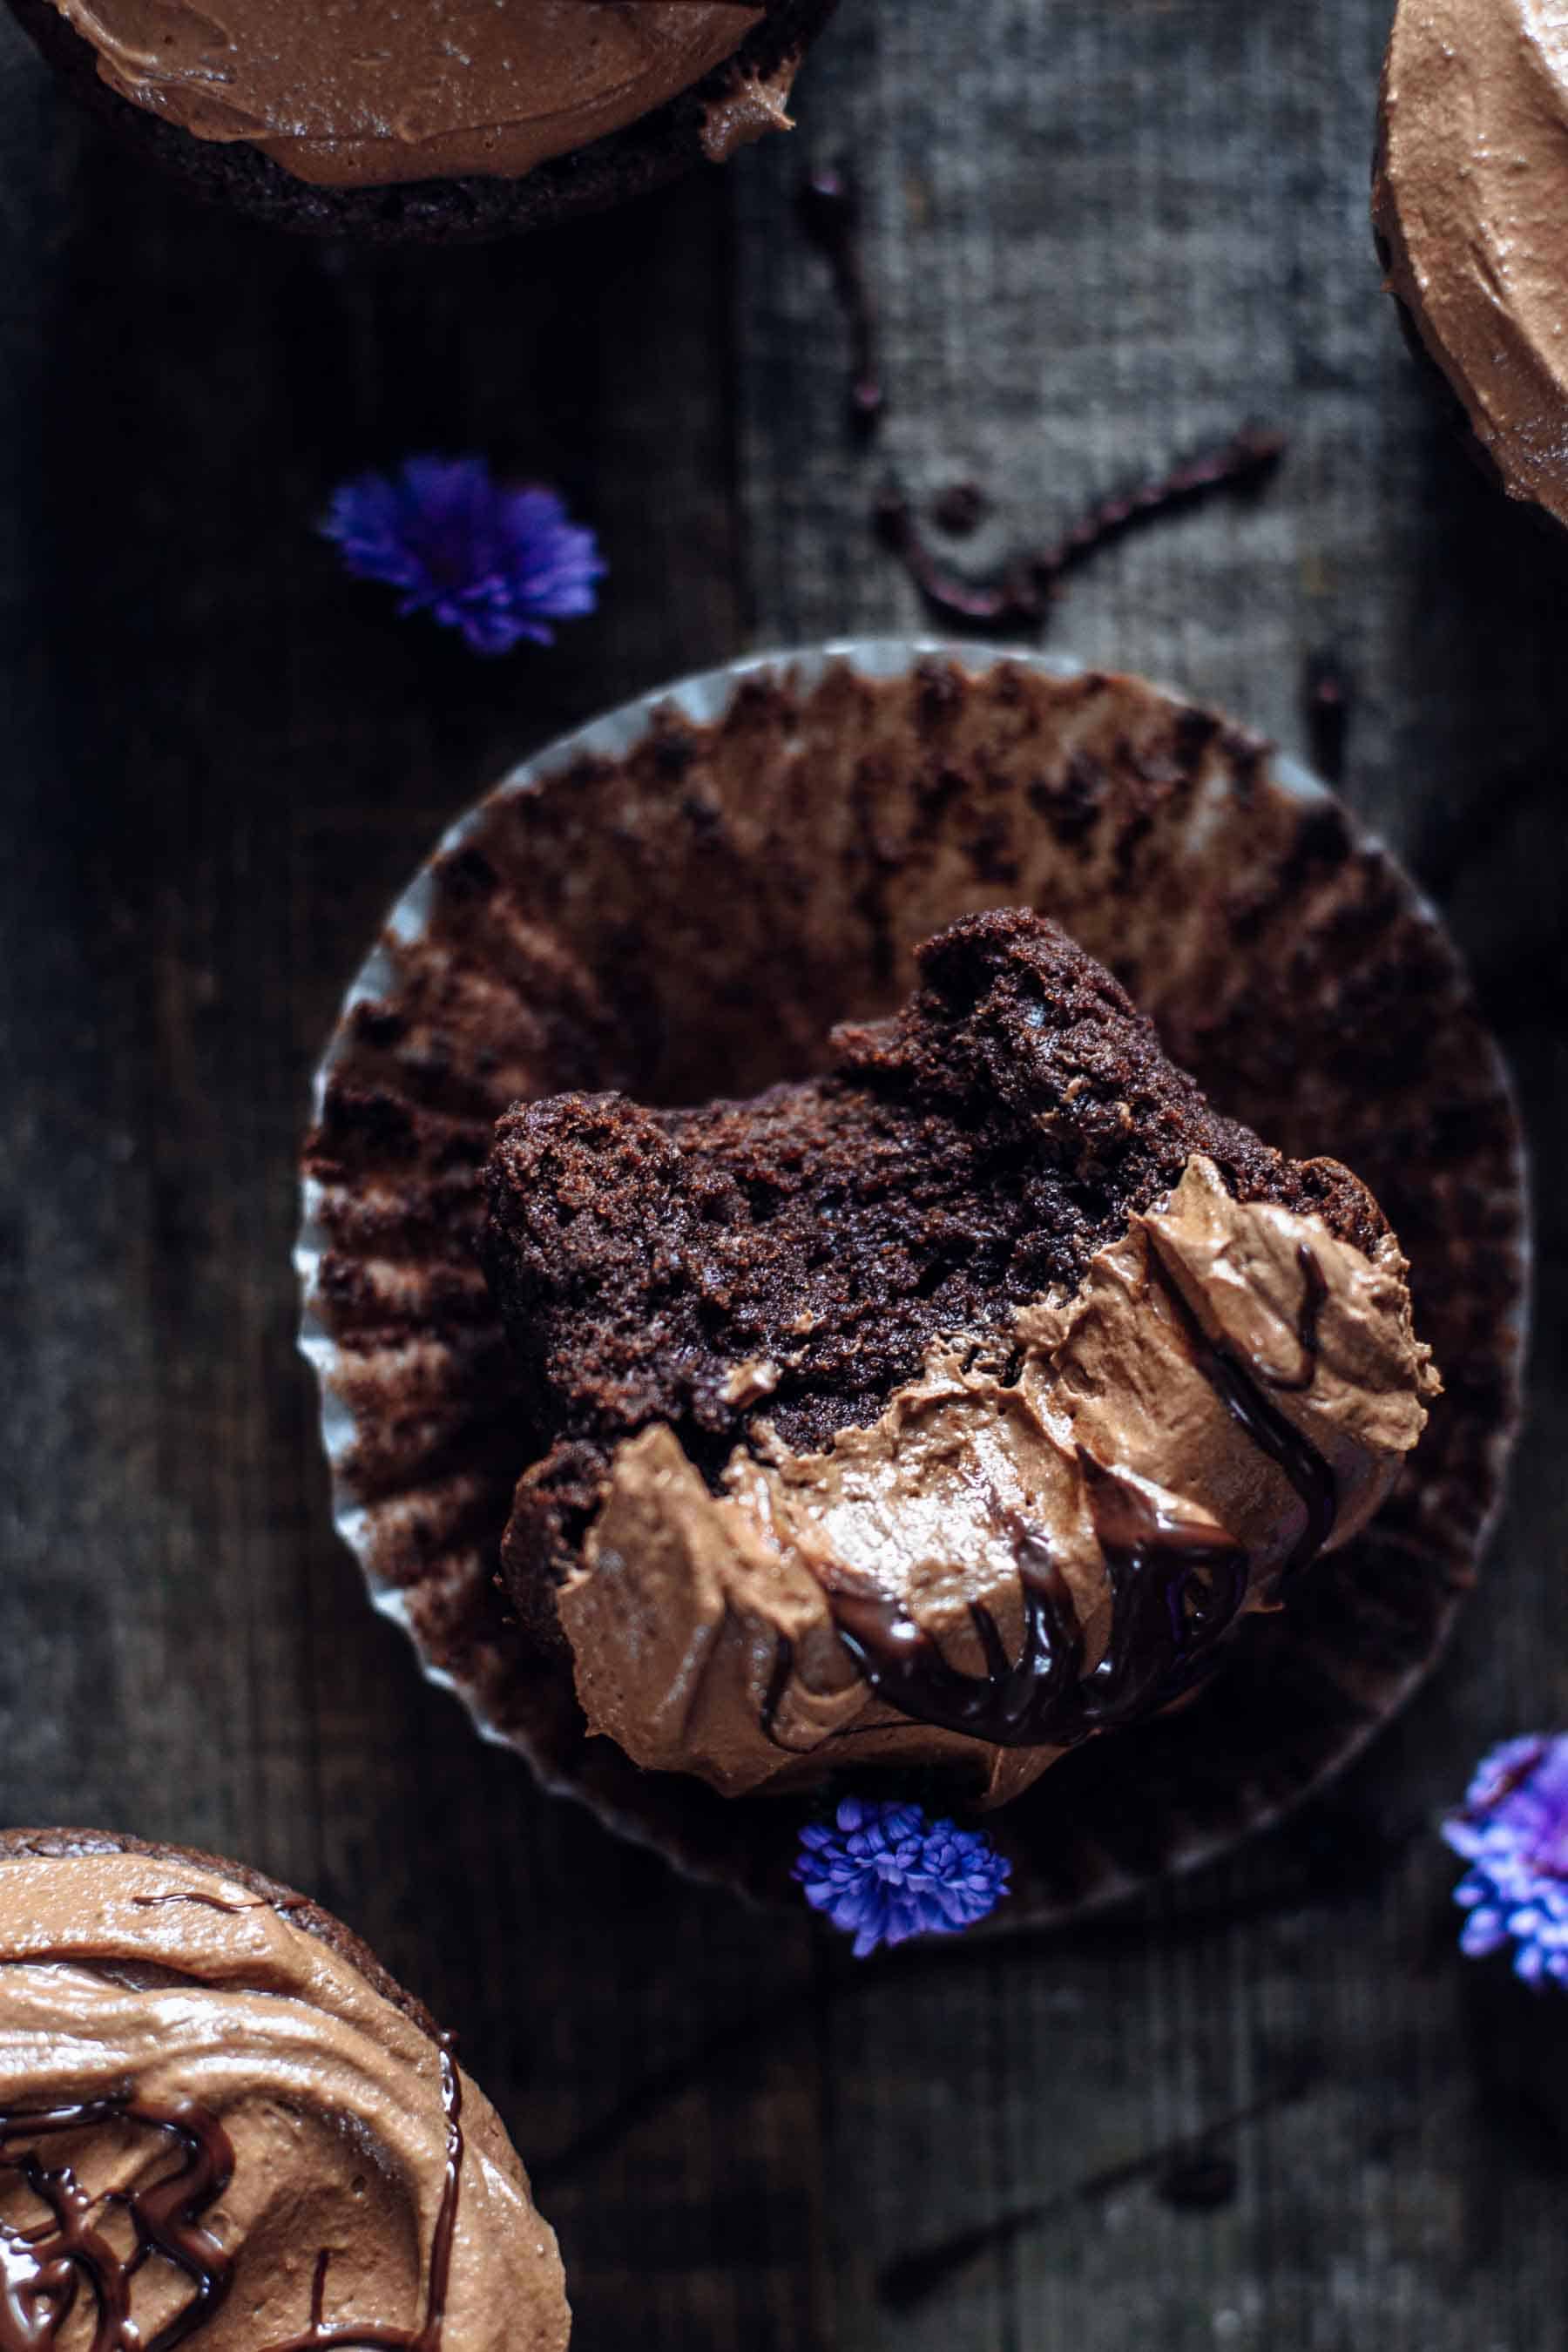 Decorative shot of a bitten Brownie Cupcakes on a wooden background